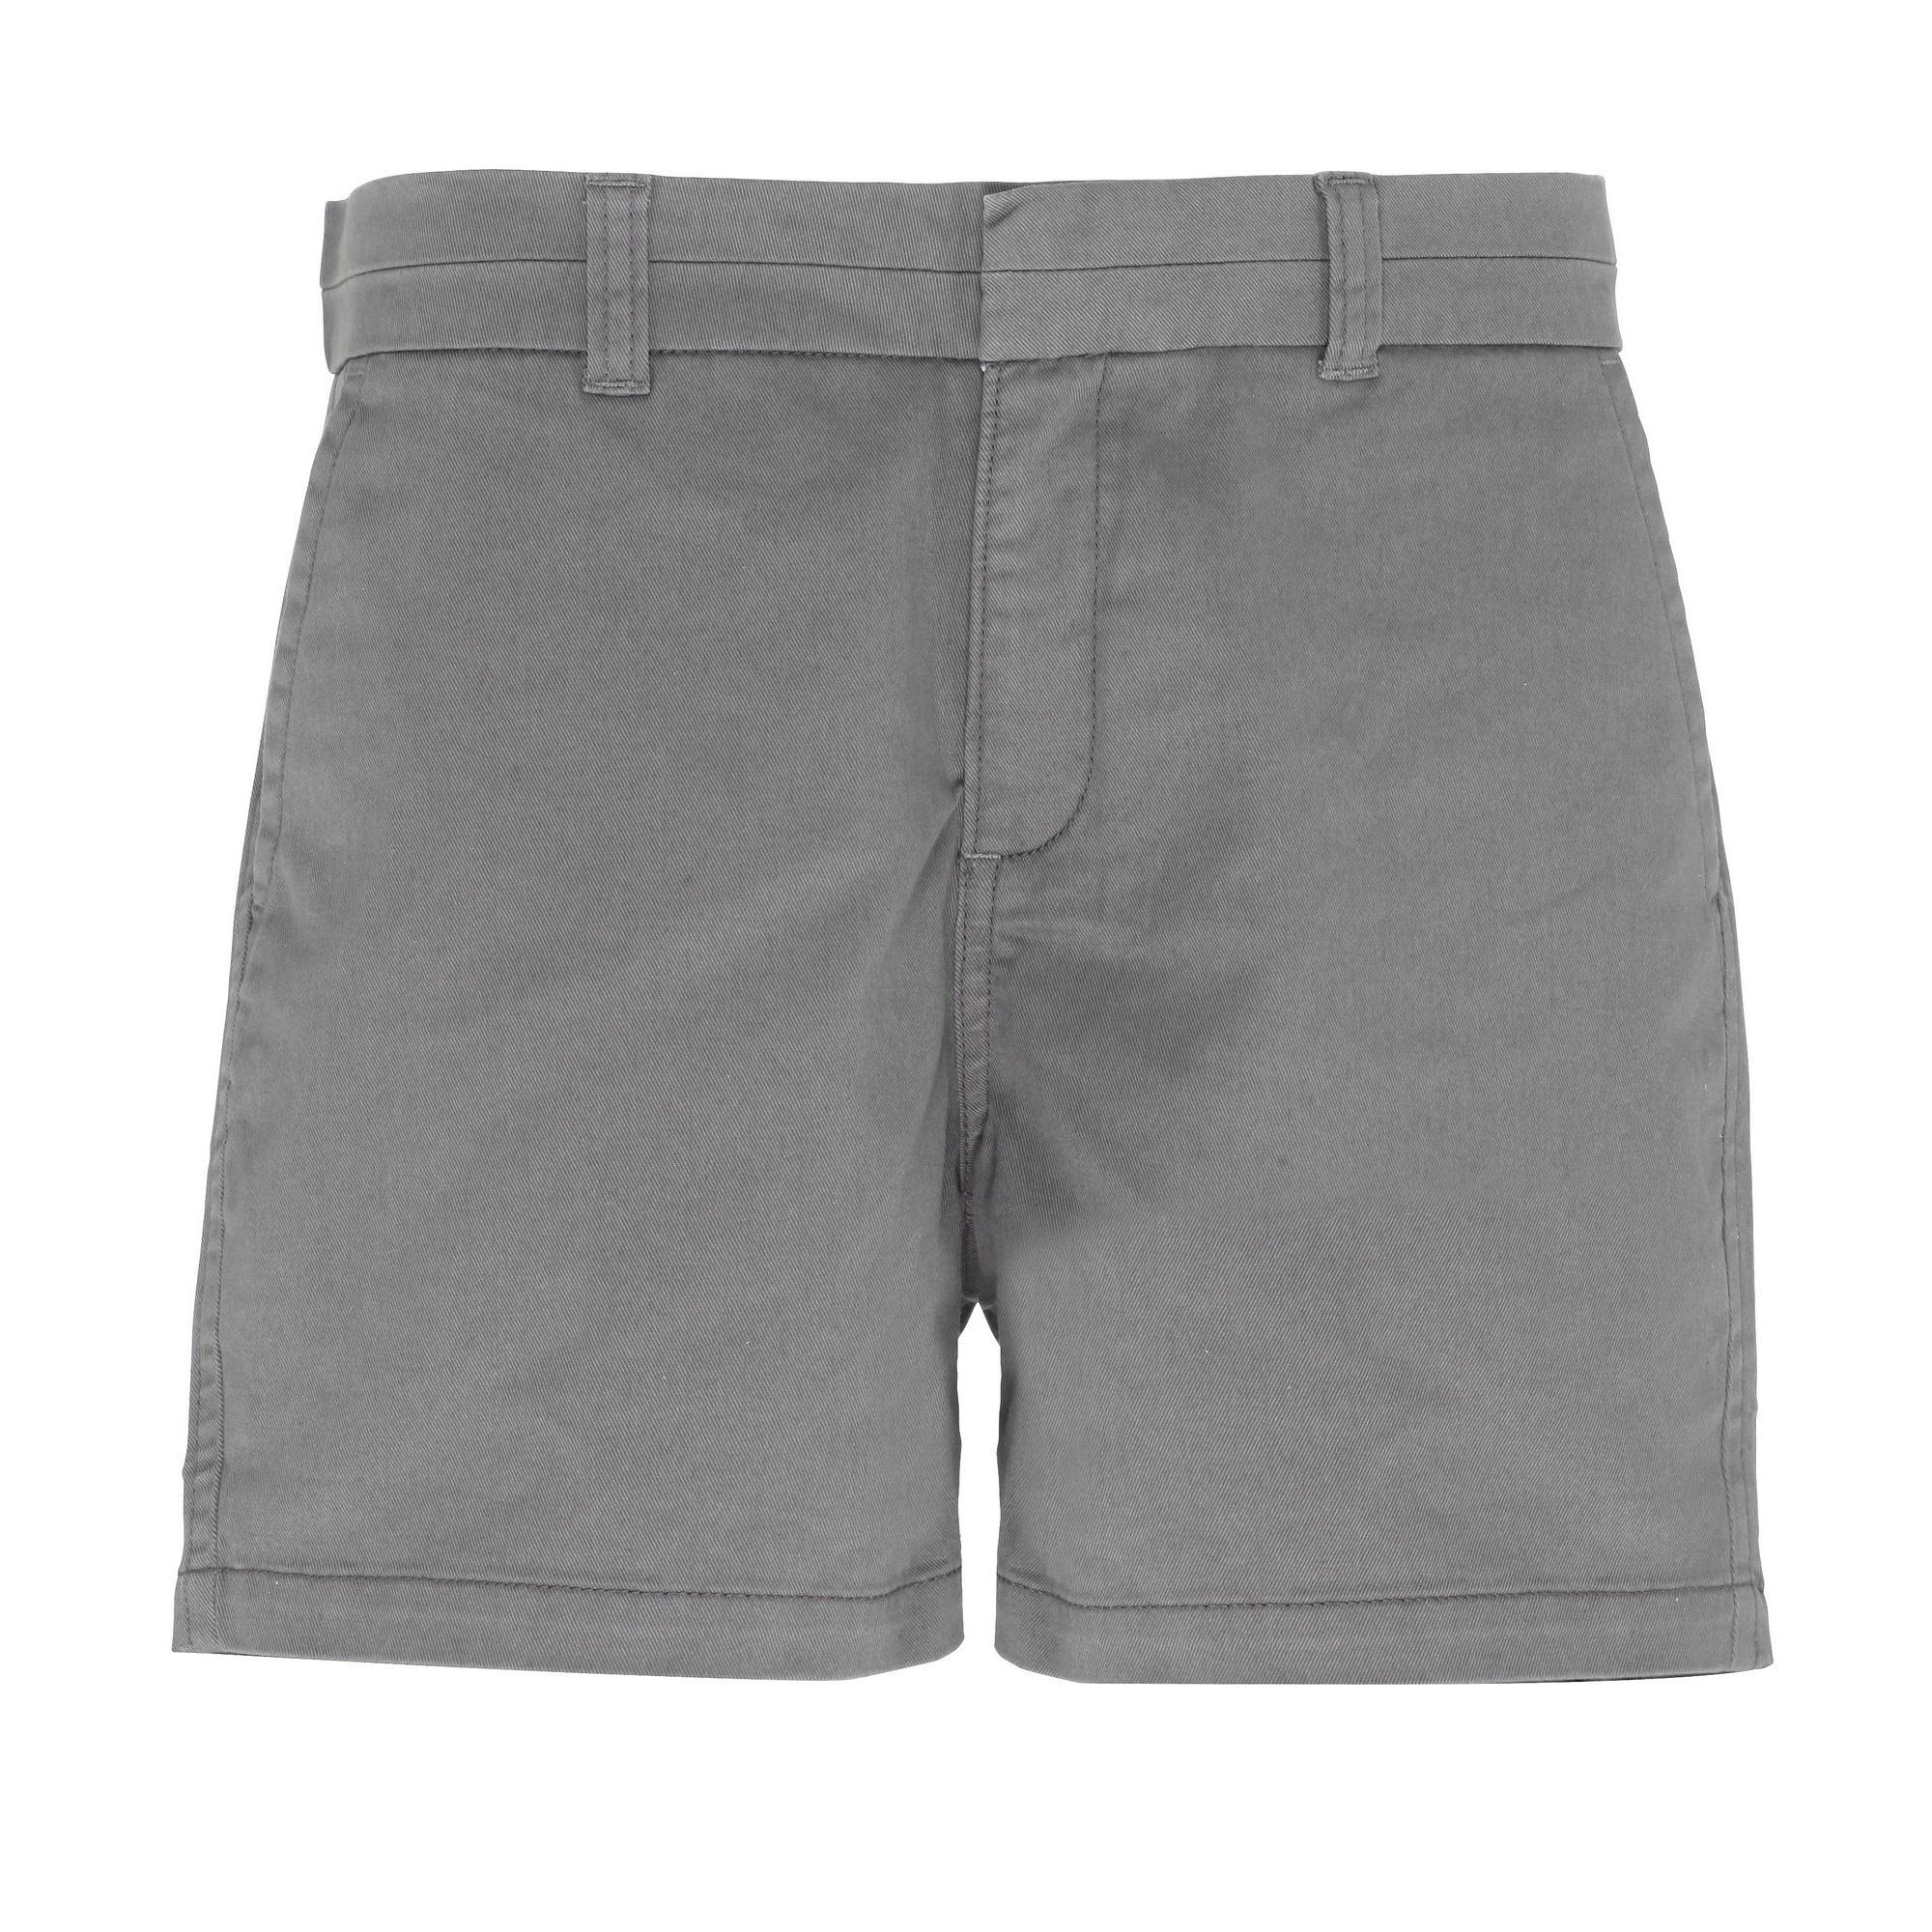 Asquith & Fox Womens/Ladies Classic Fit Shorts (Slate) (2XL)